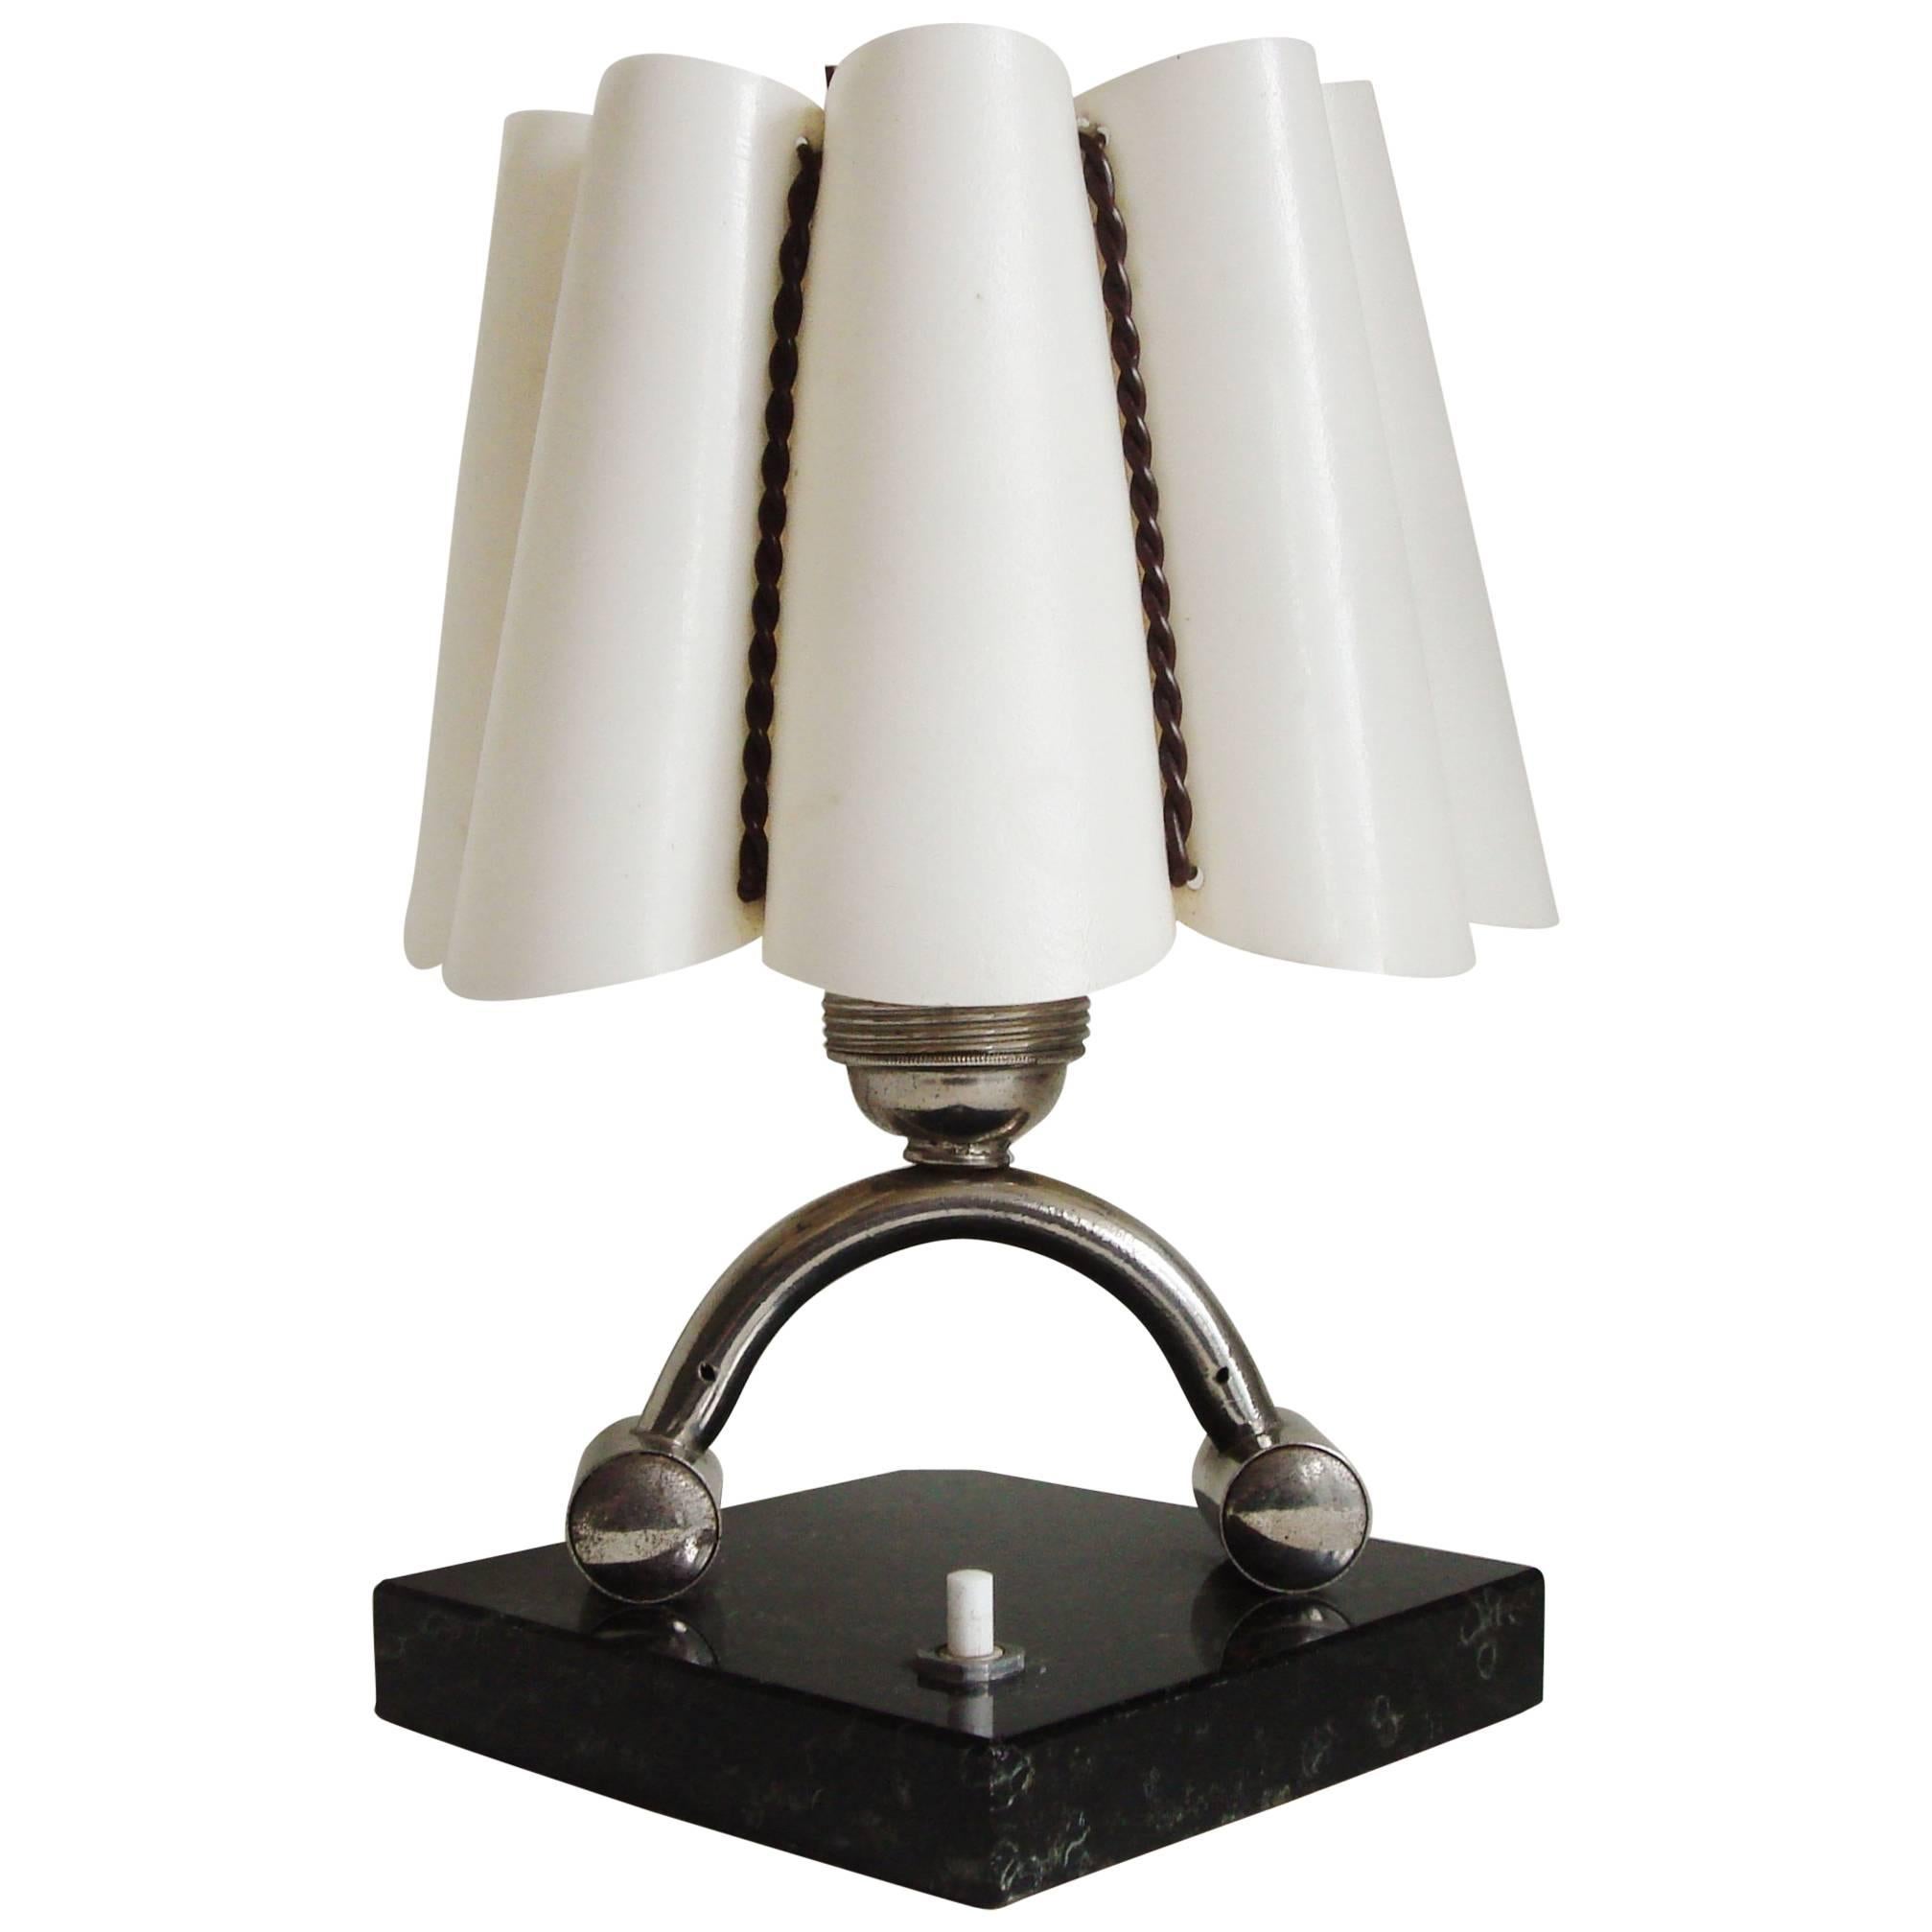 Petite French Art Deco Chrome & Marble Accent Lamp with Gimped Fiber Glass Shade For Sale